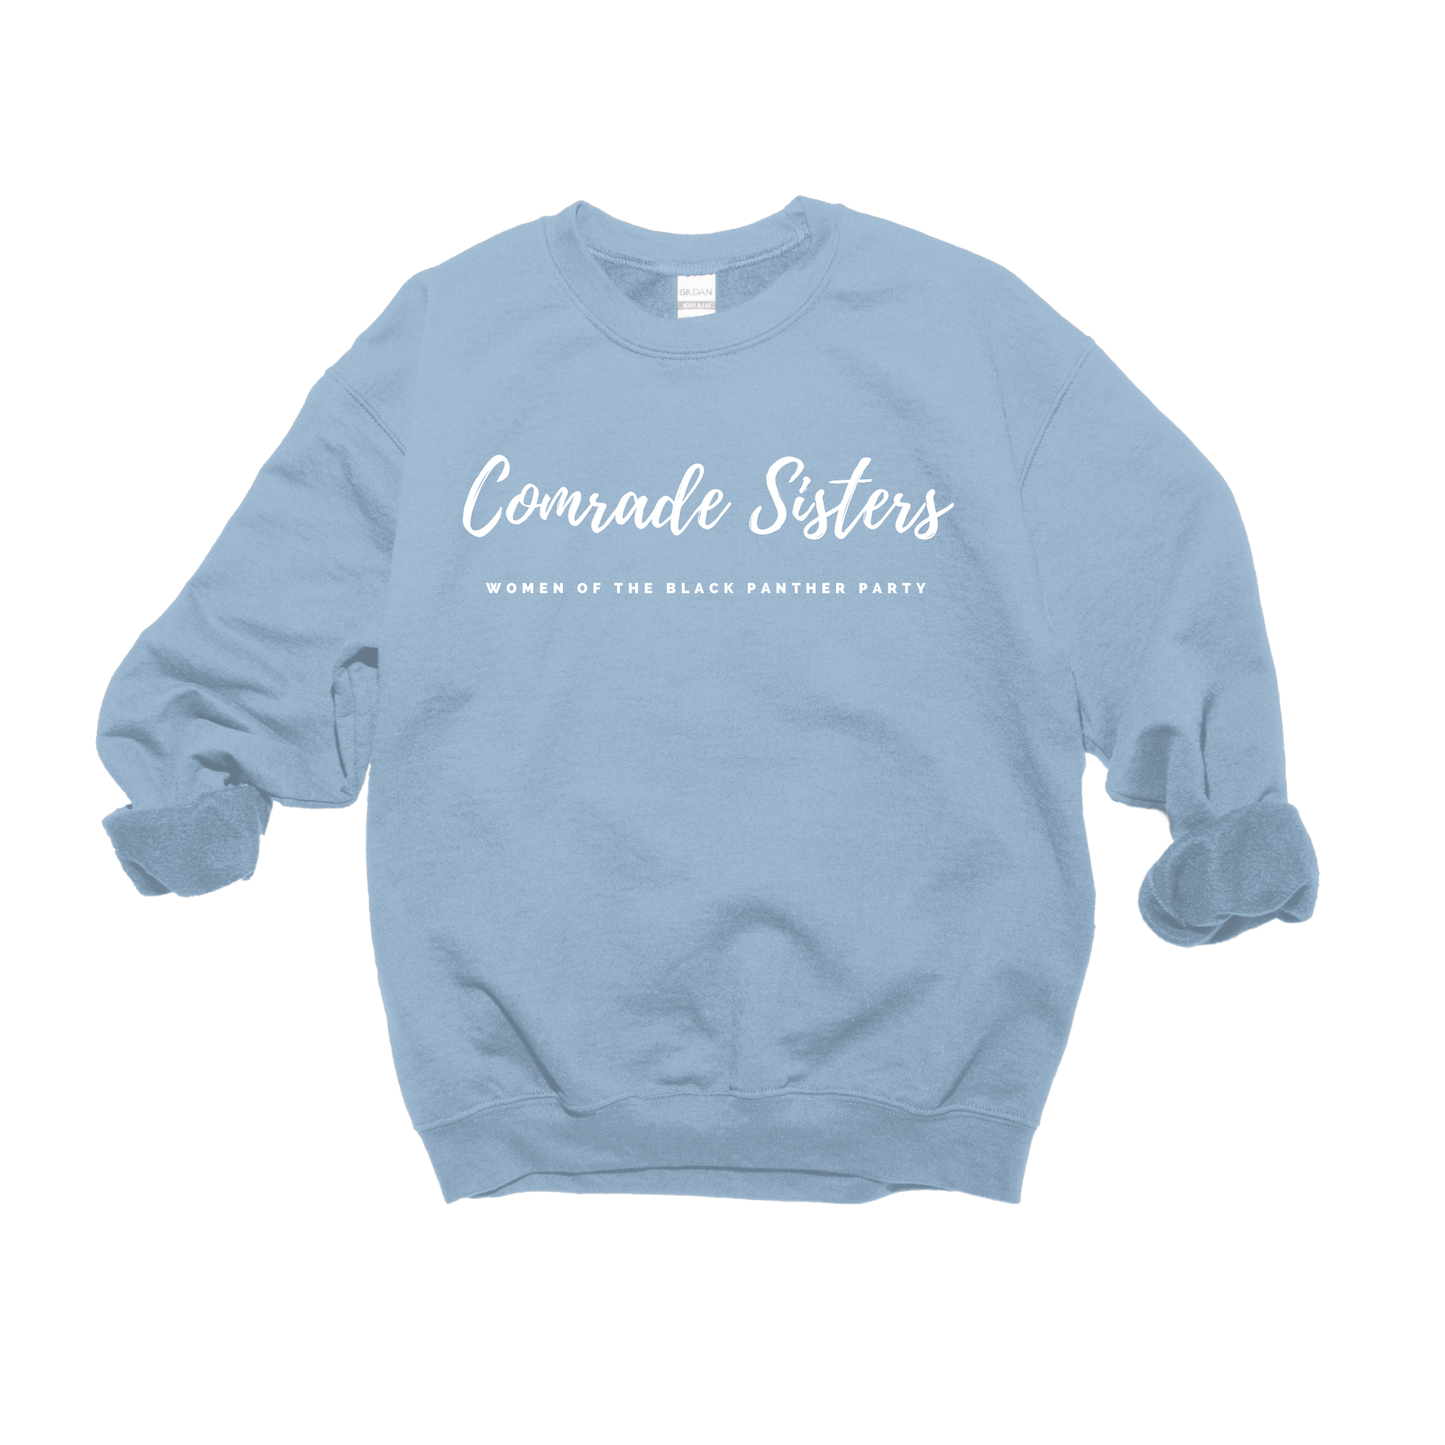 EXCLUSIVE Commemorative Comrade Sisters Women of the Black Panther Party Sweatshirt